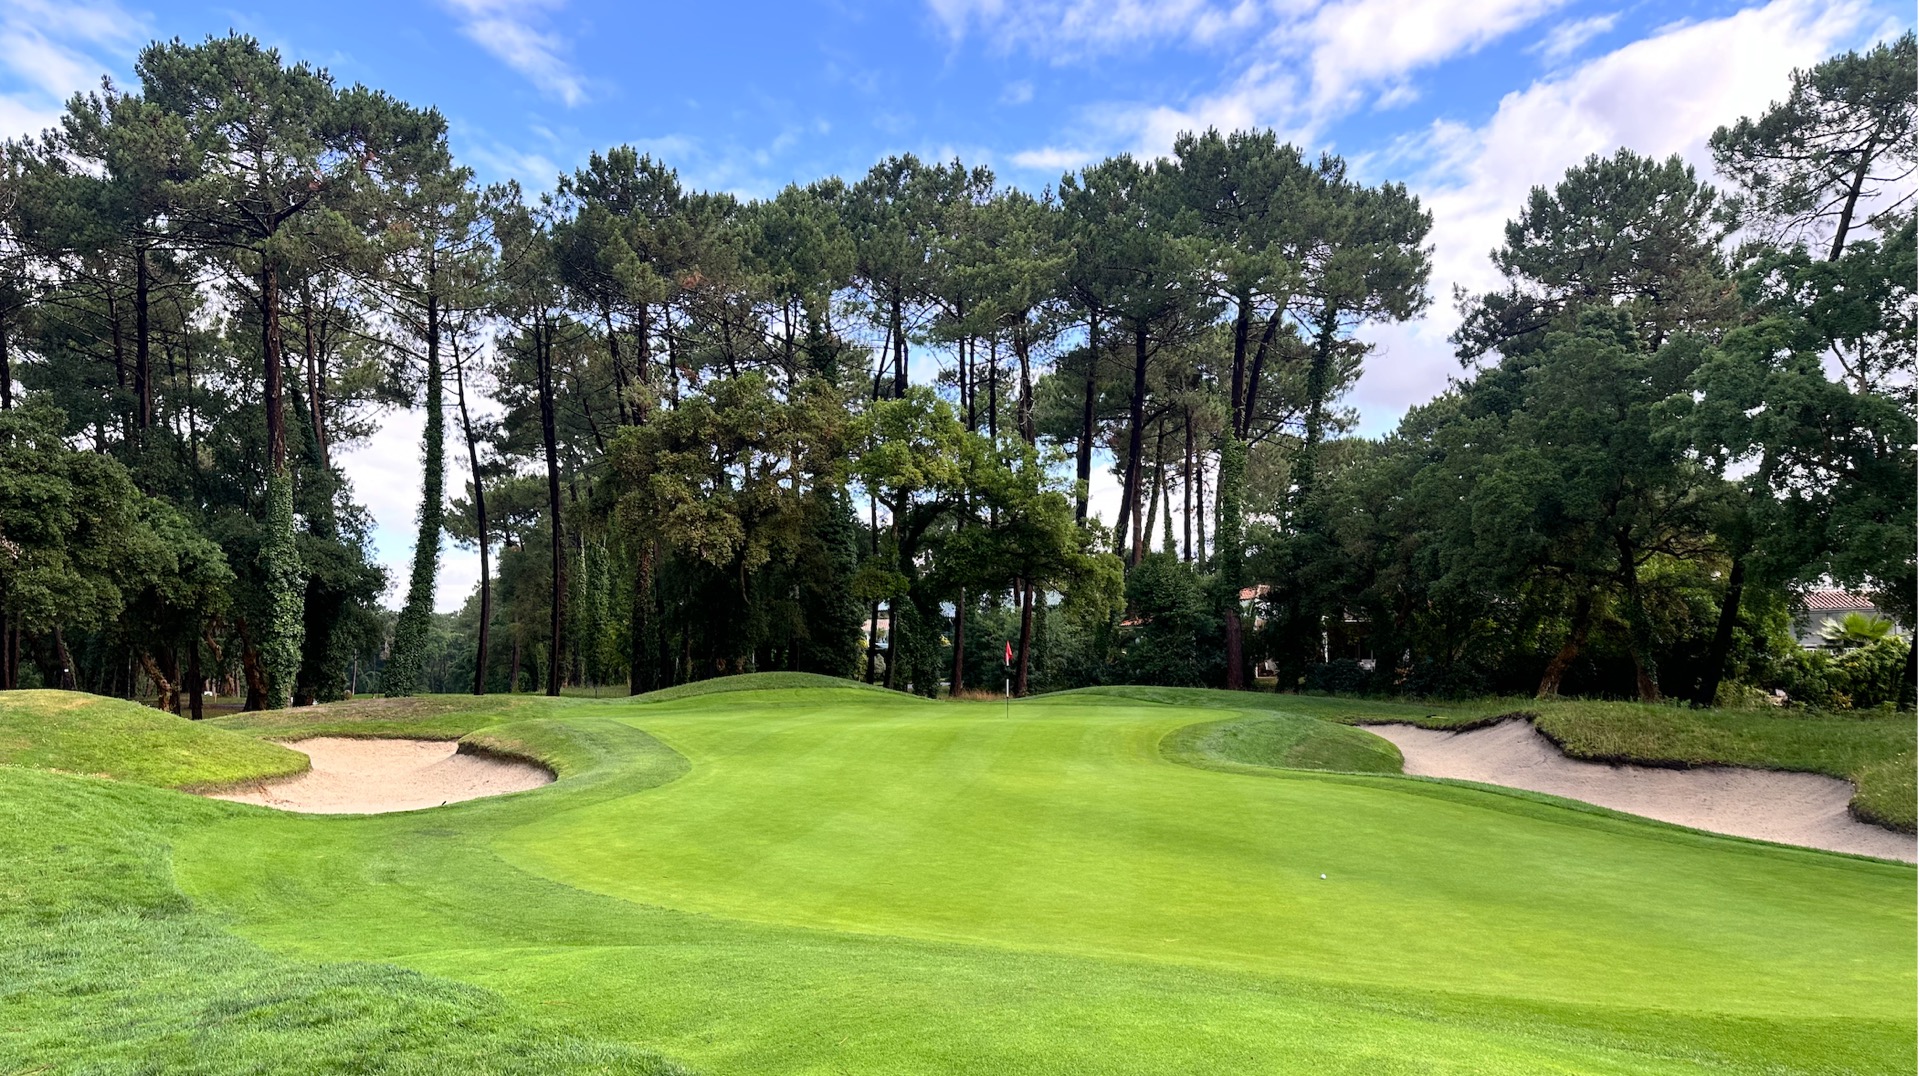 Guarded by bunkers at Seignosse Golf Club, France